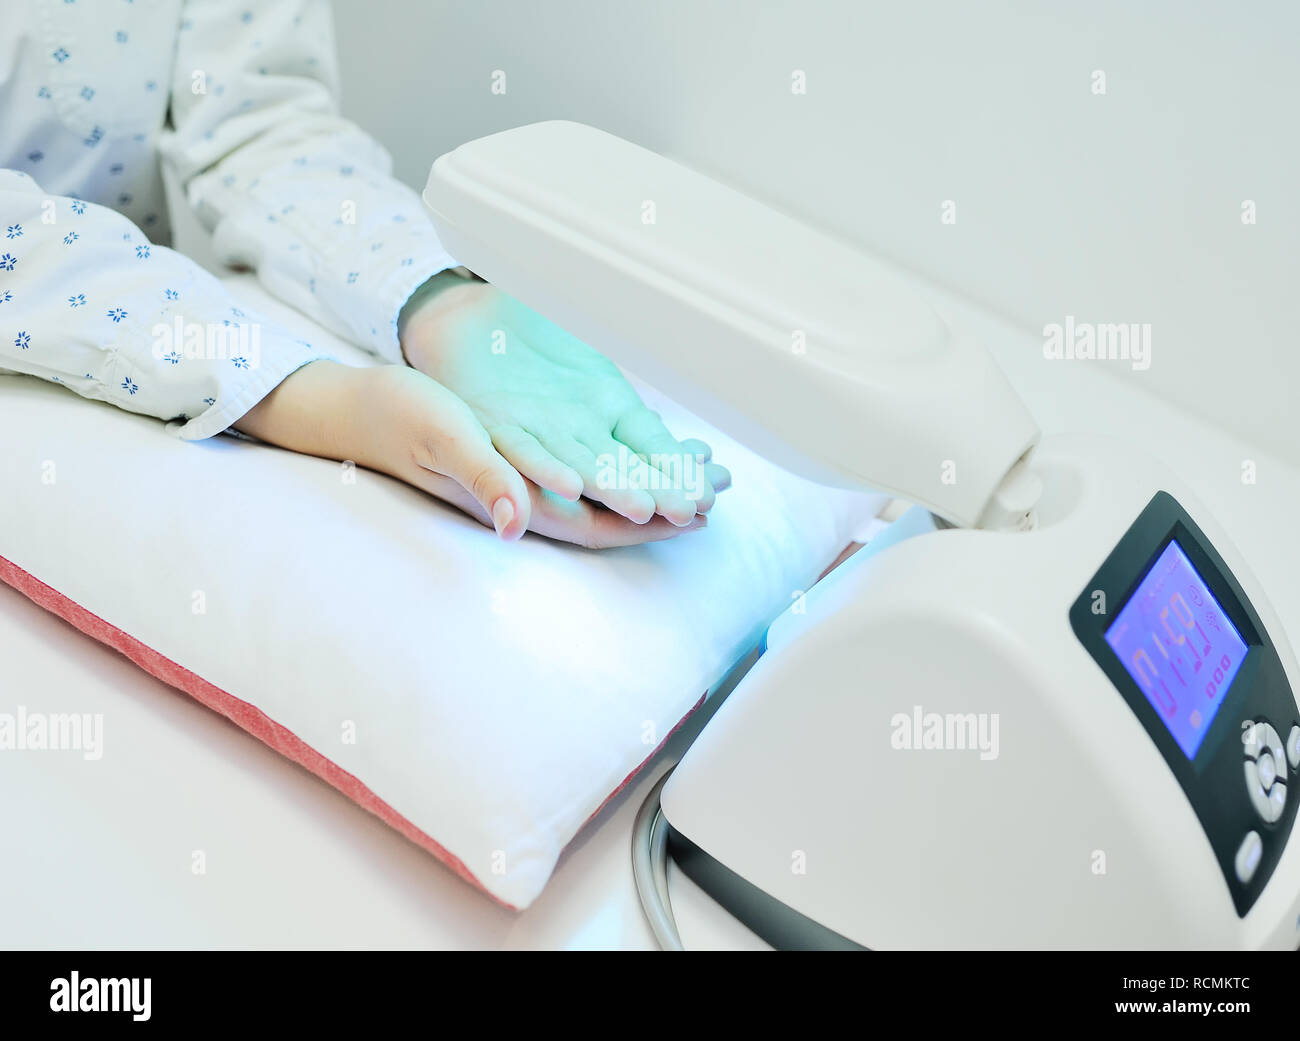 doctor spends psoriasis treatment using ultraviolet lamps and phototherapy. Stock Photo